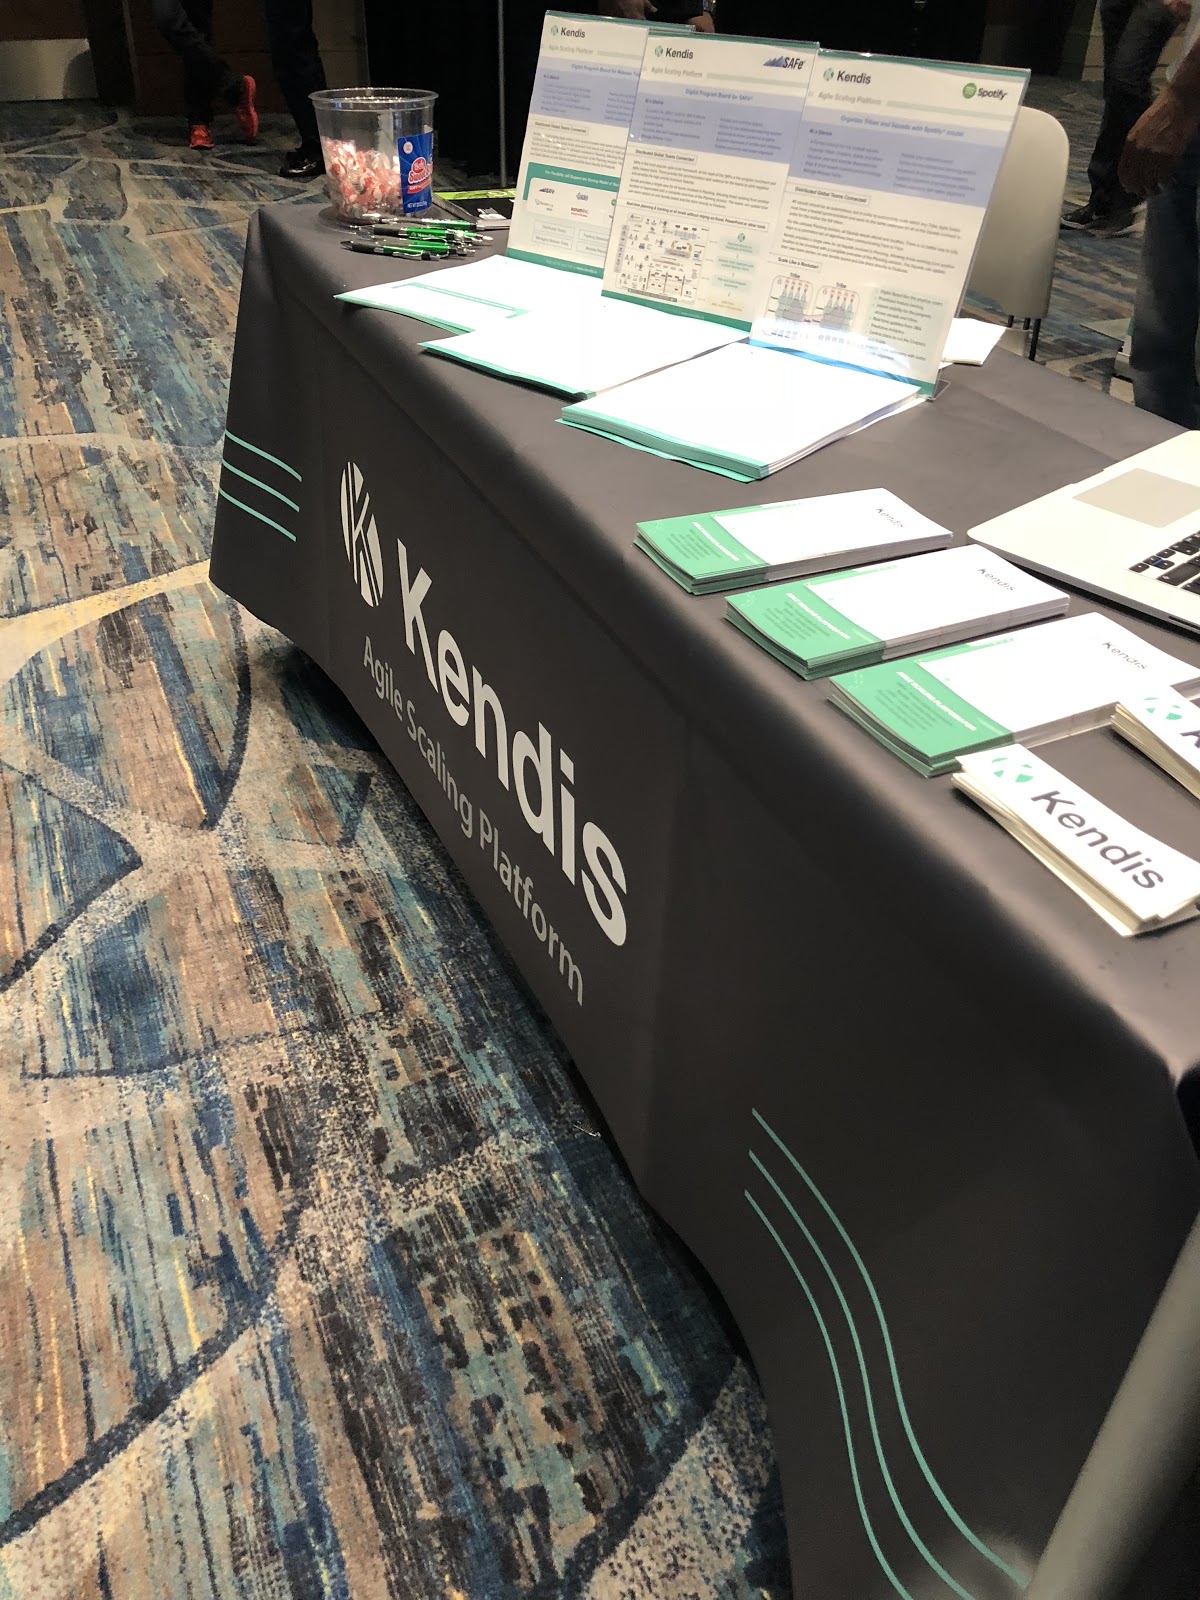 Kendis-booths-at-agile-conference-2018